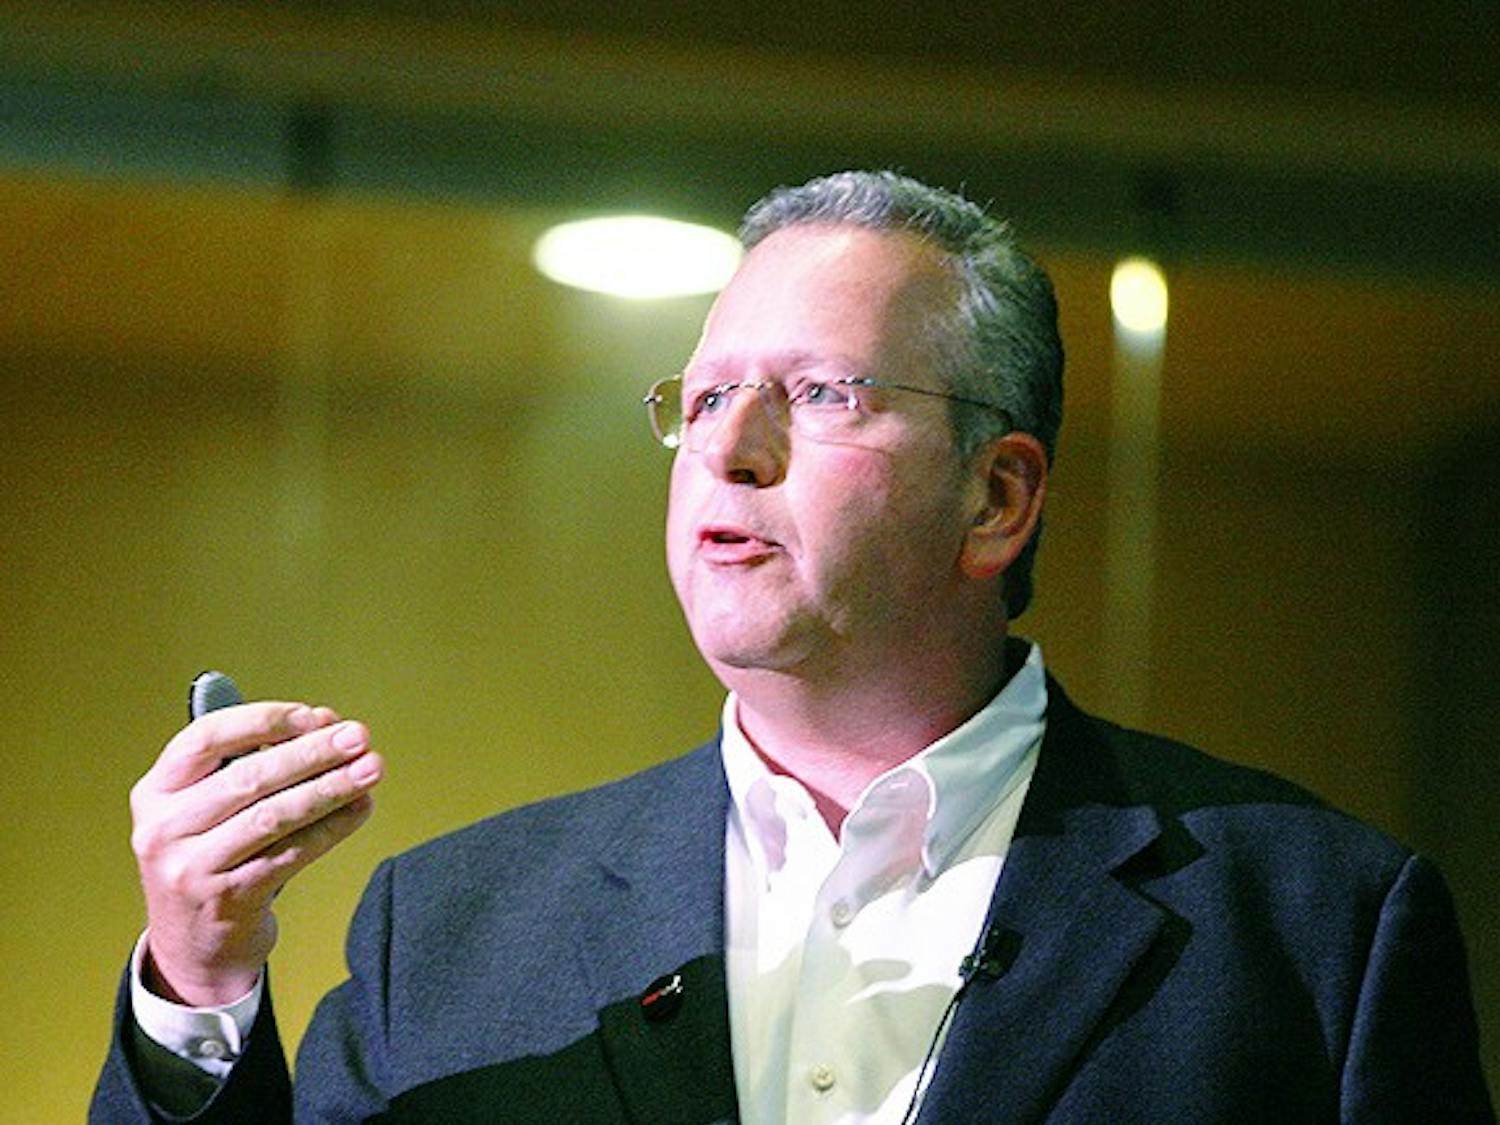 	Joseph Desimone speaks at the TEDxUNC conference in early 2012.